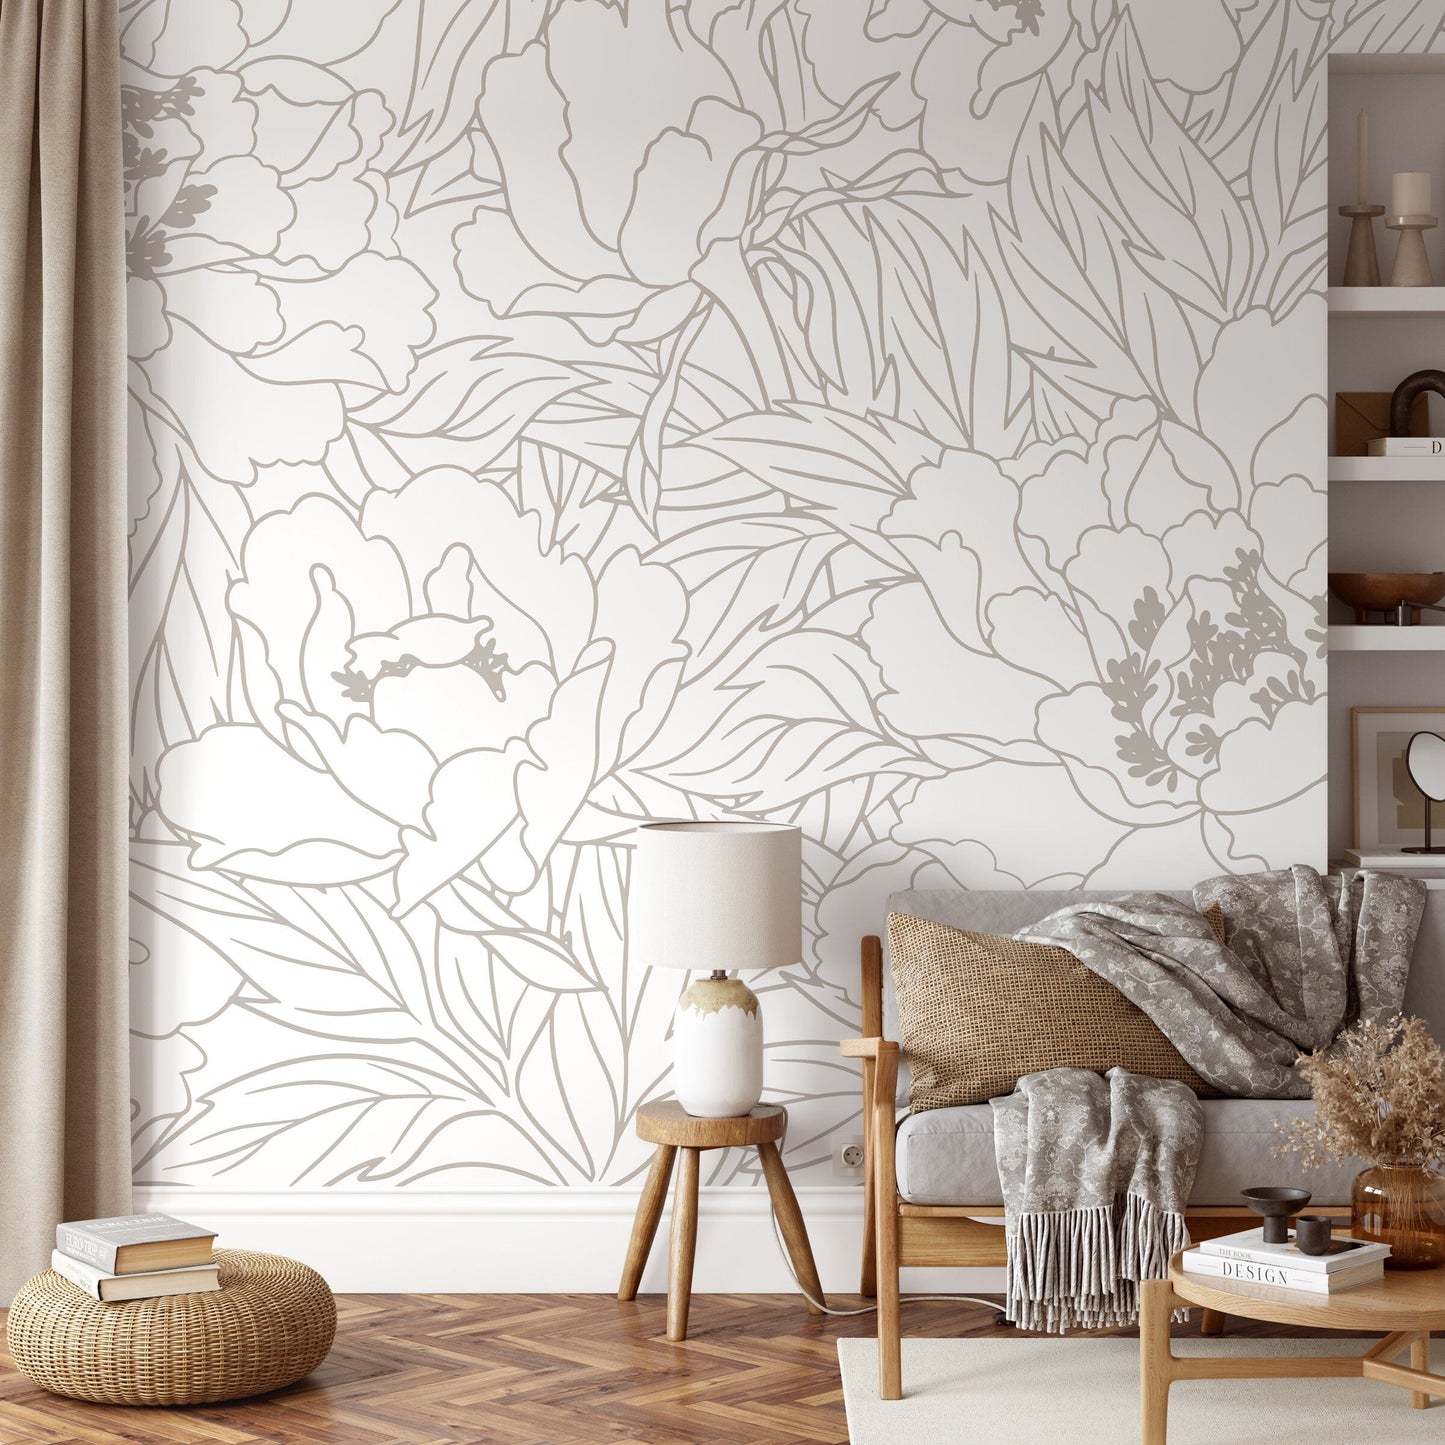 Neutral Large Floral Wallpaper / Peel and Stick Wallpaper Removable Wallpaper Home Decor Wall Art Wall Decor Room Decor - C920